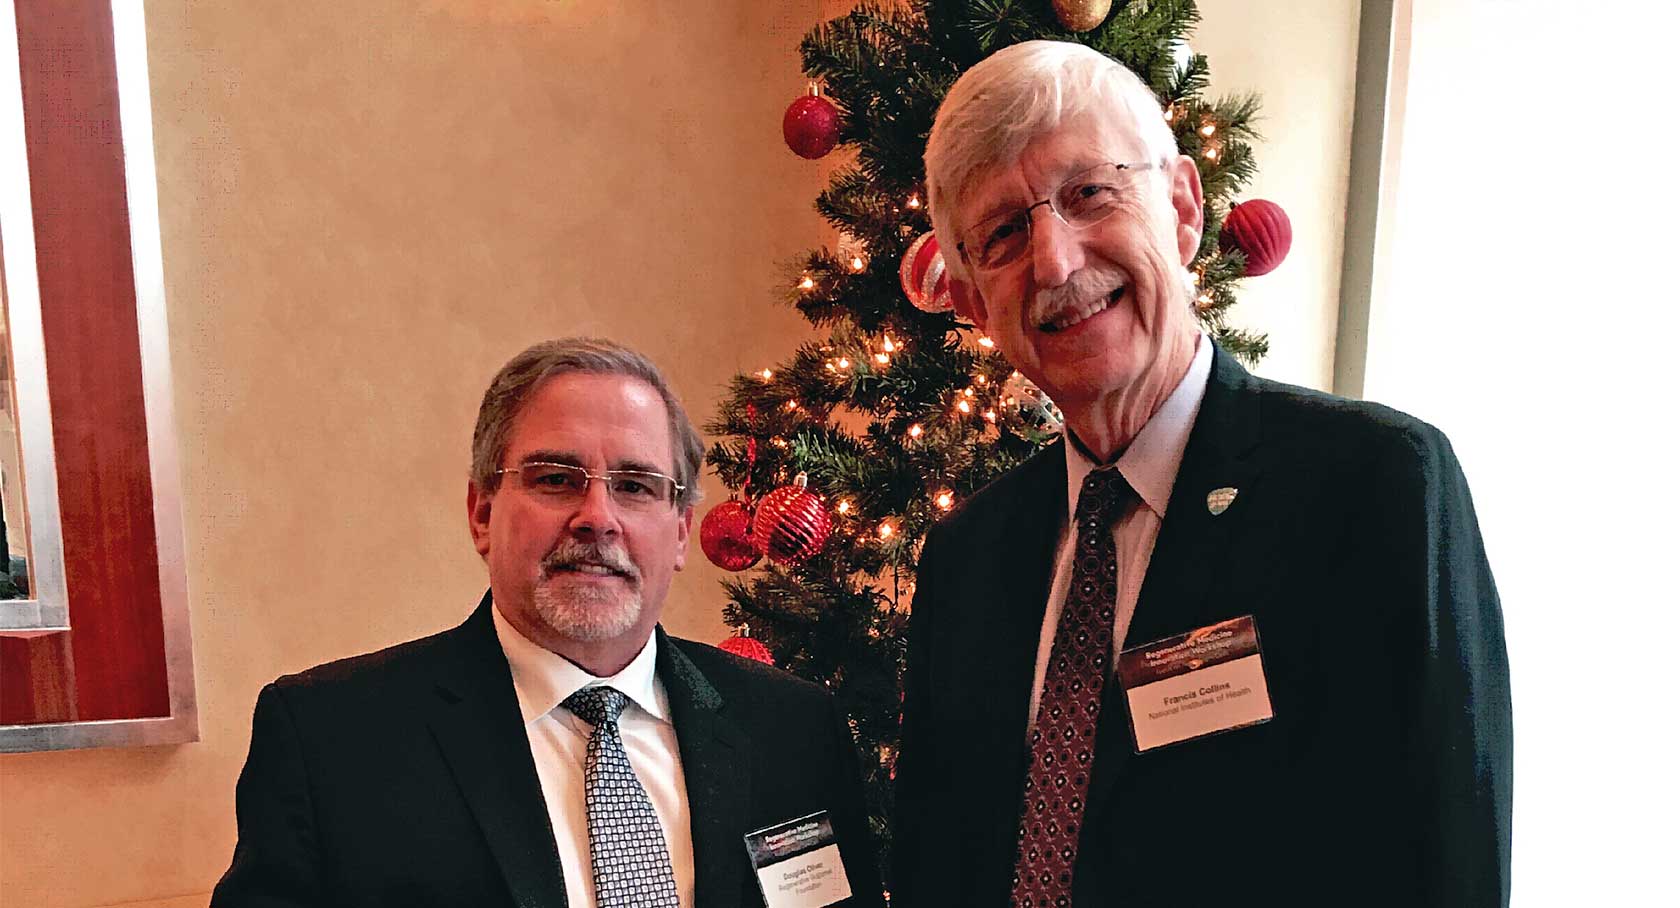 Pioneers of Hope: Patient Advocate Doug Oliver's Interview of Dr. Francis Collins, Director, National Institutes of Health (NIH)